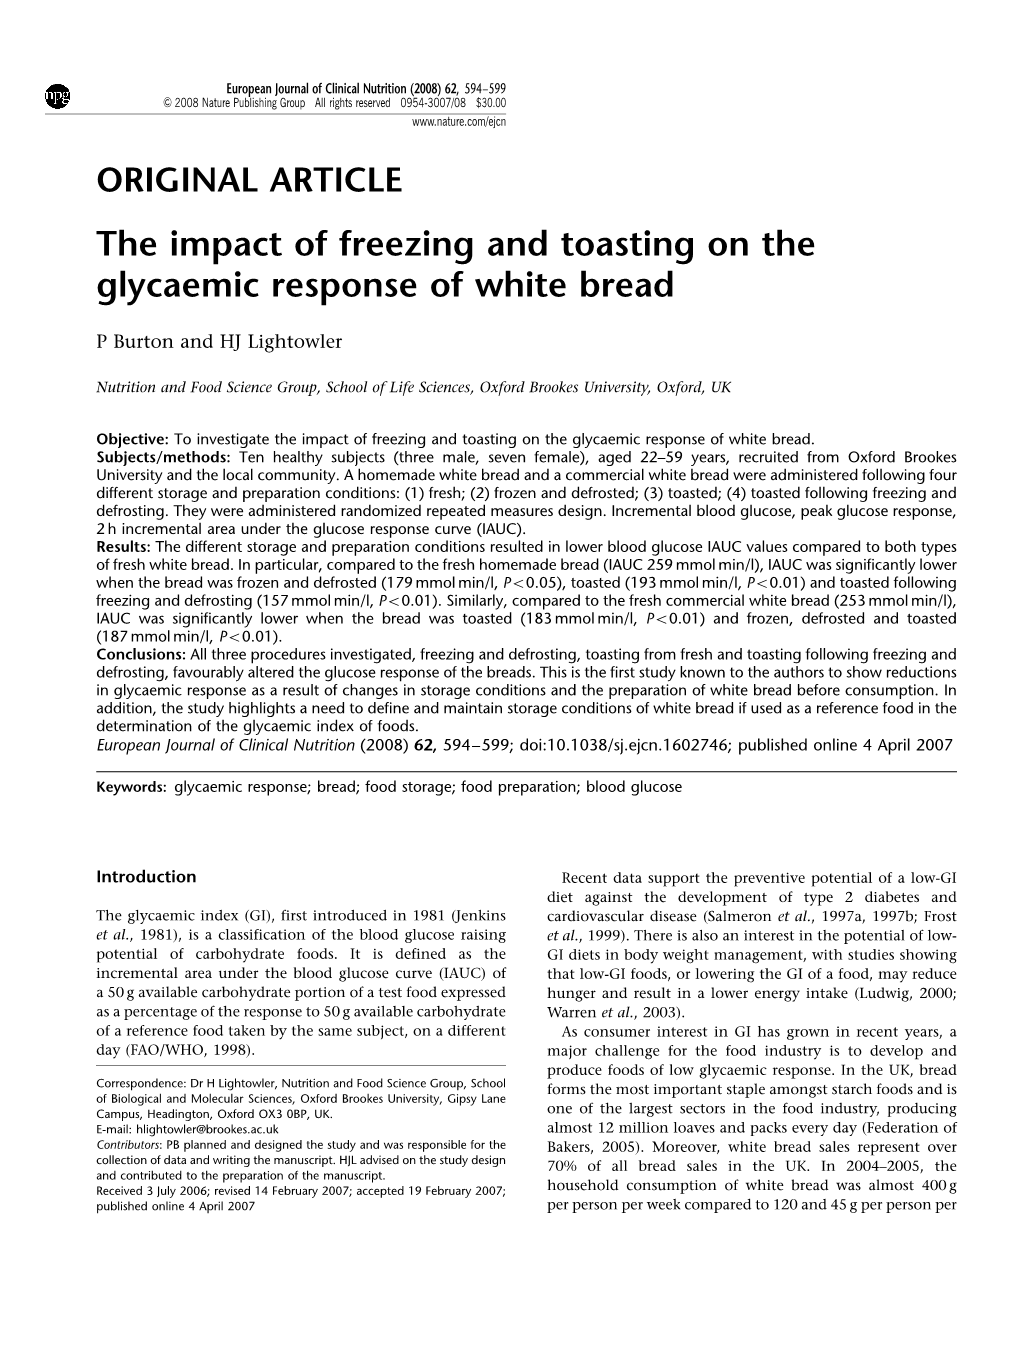 The Impact of Freezing and Toasting on the Glycaemic Response of White Bread